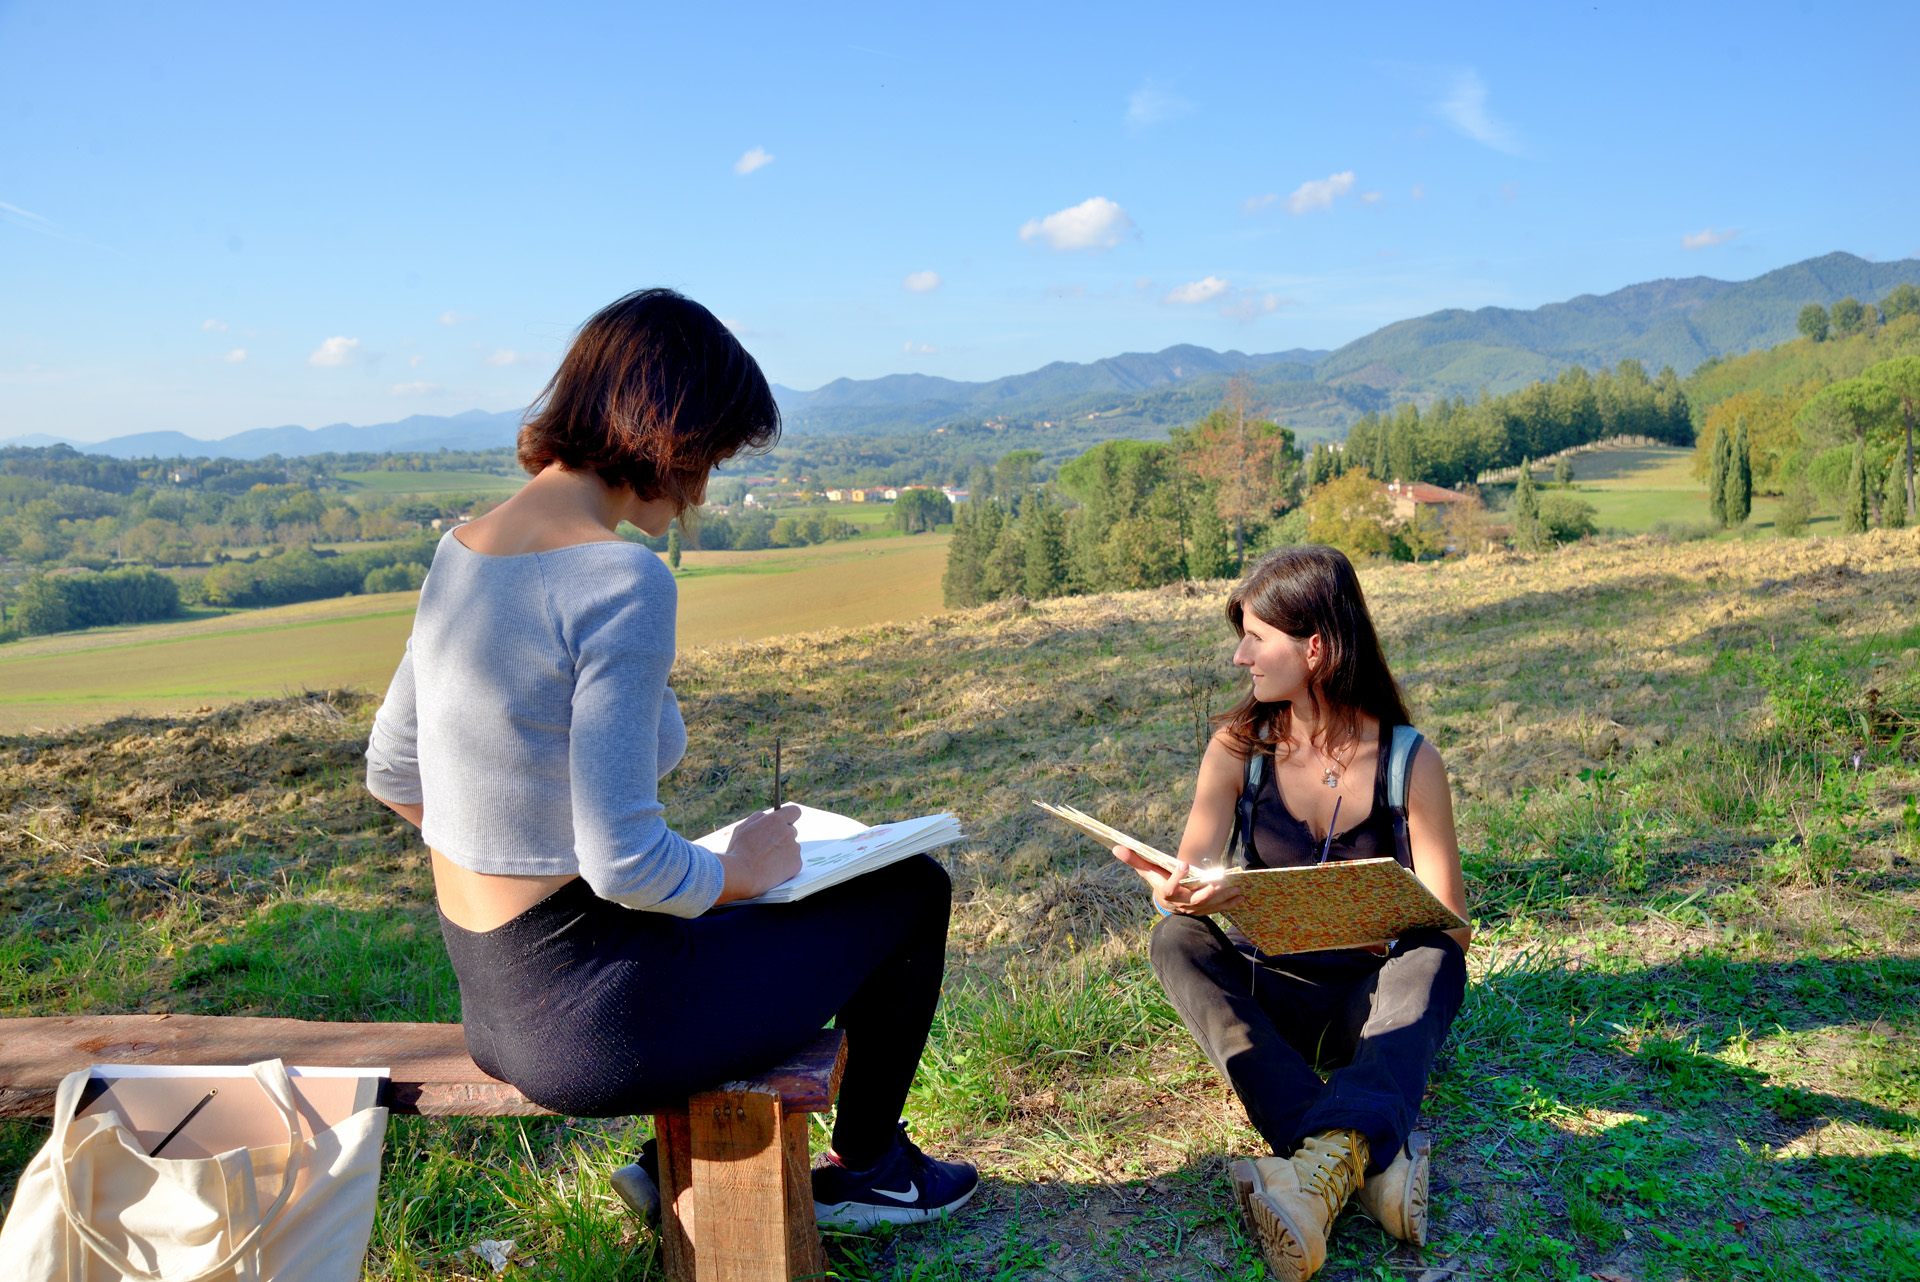 An exclusive trekking and drawing experience in the heart of Mugello